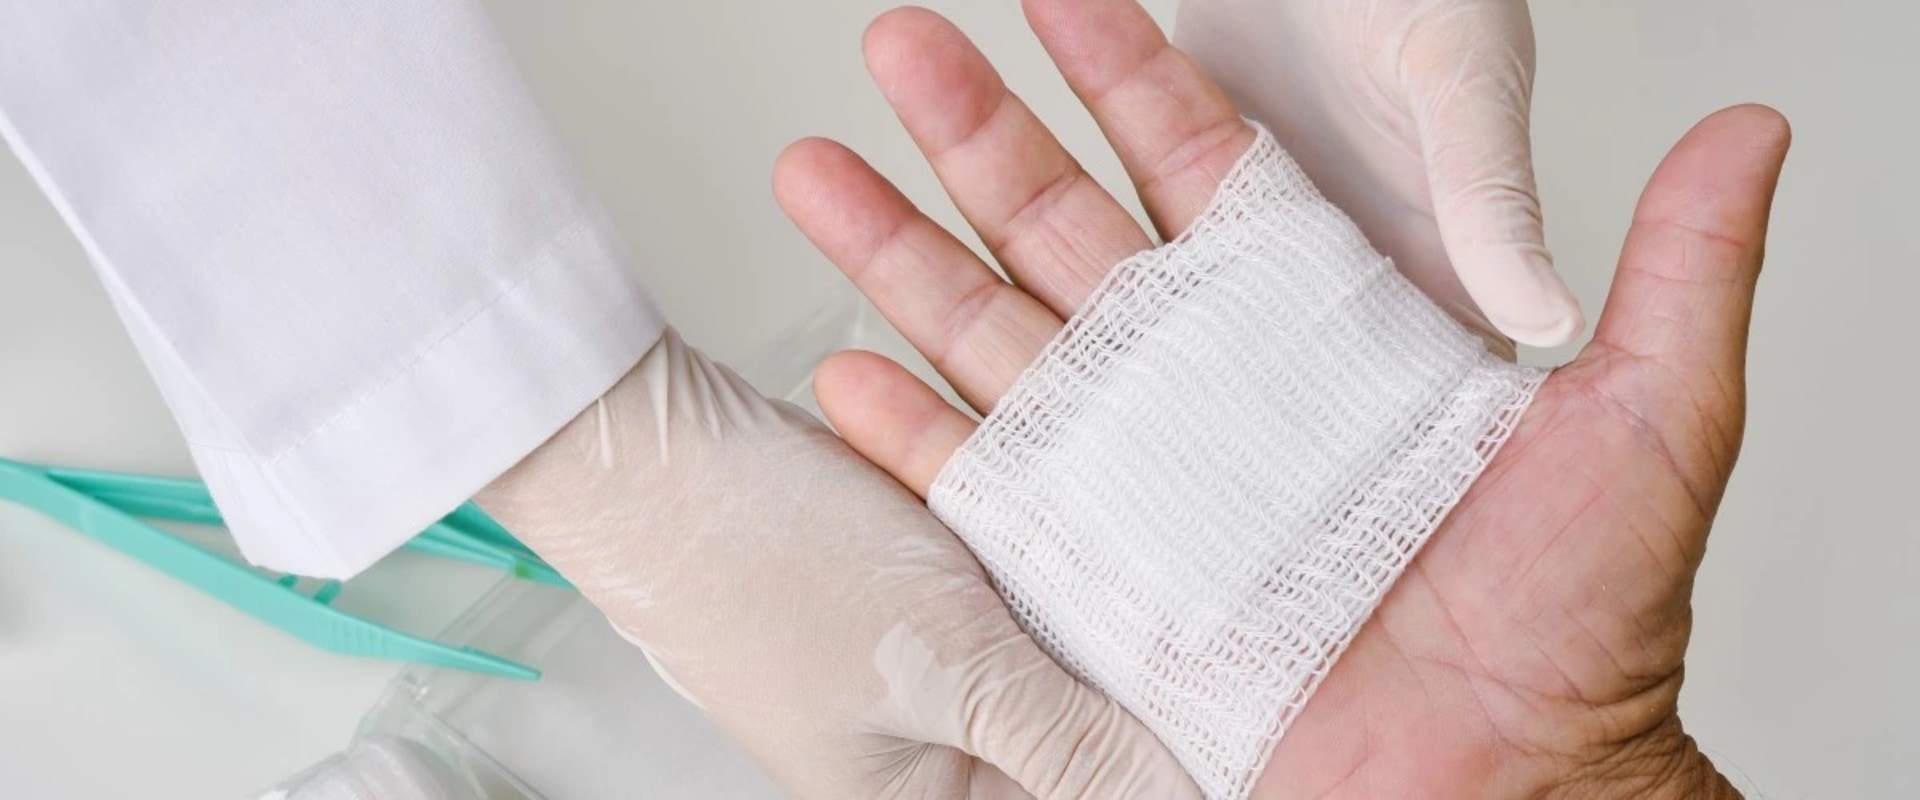 Can Gauze Wound Dressing Be Used on All Types of Wounds